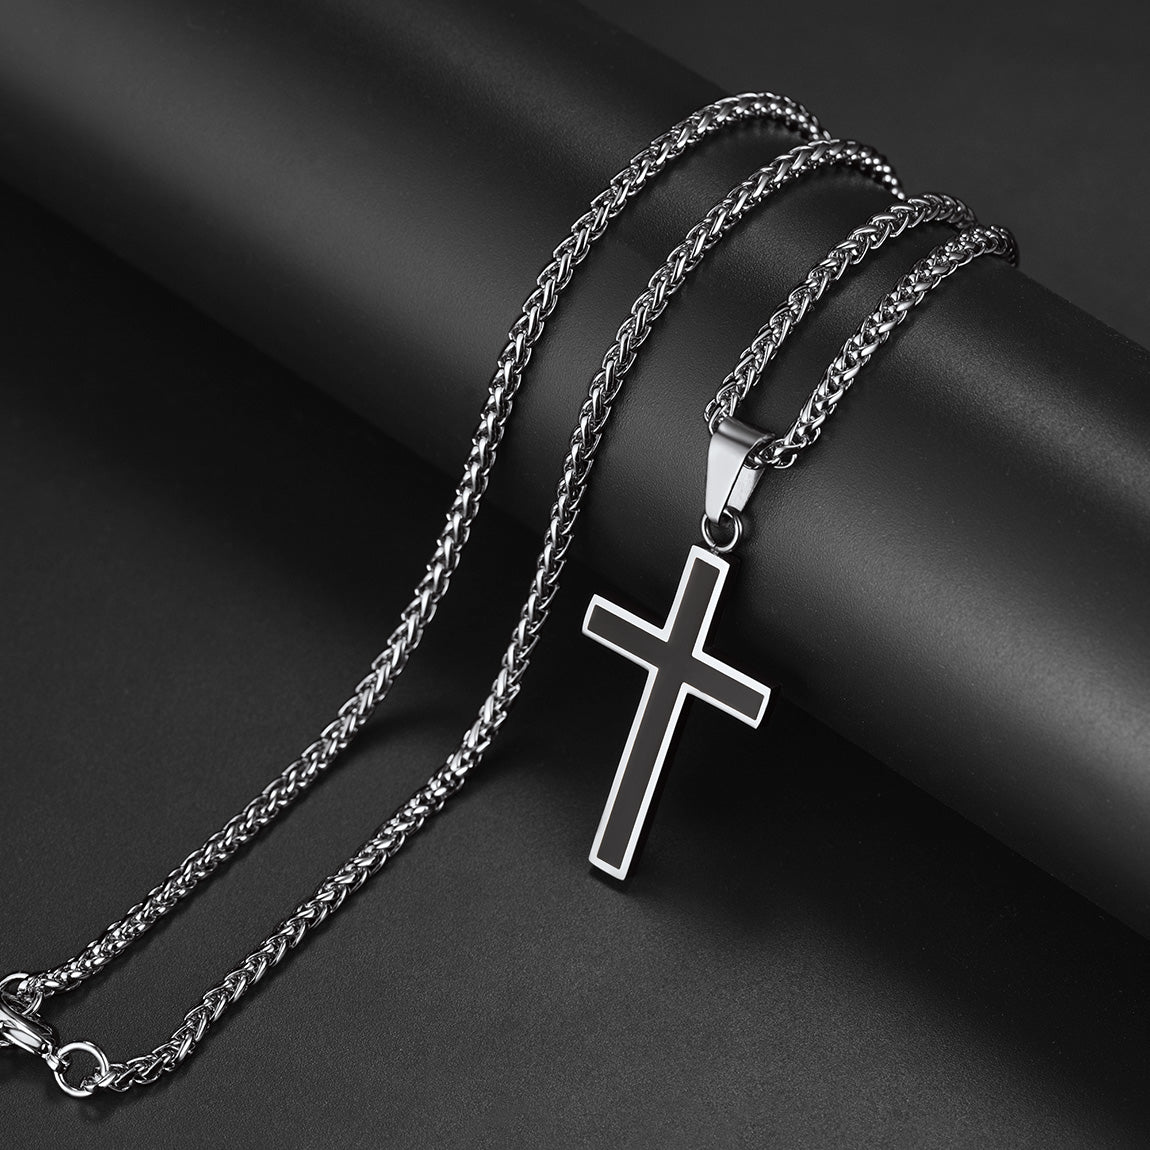 ChainsPro Mens Christian Cross Pendant Necklace Chain